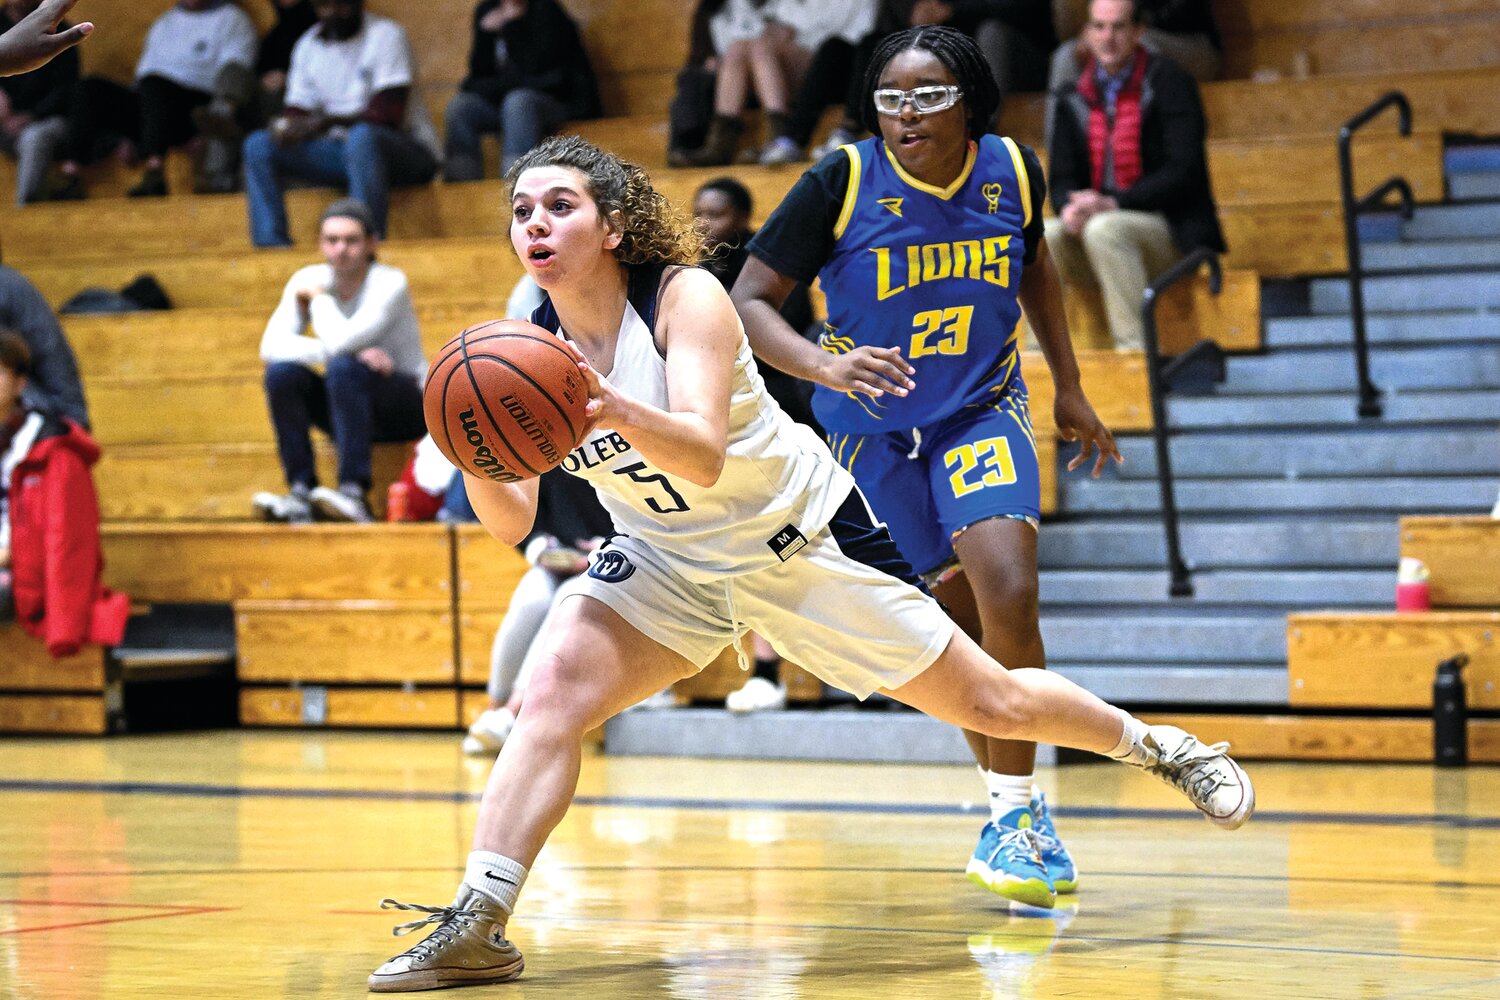 Solebury School’s Hanna Shmuckler gets around the baseline for a pass in the fourth quarter.